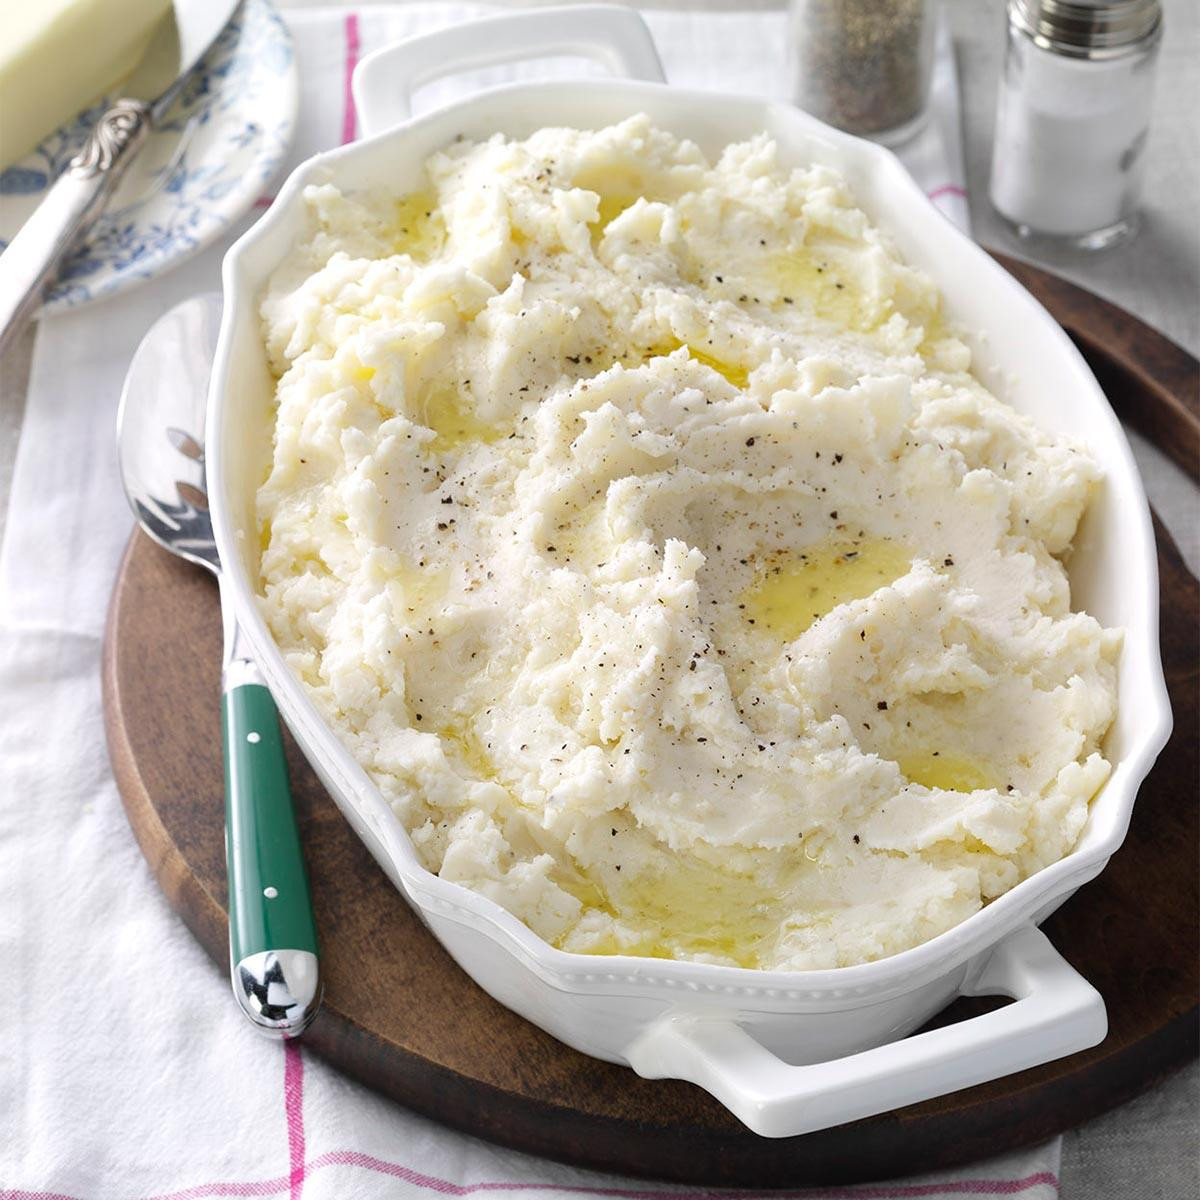 Mashed Potatoes Recipe For Thanksgiving
 Classic Make Ahead Mashed Potatoes Recipe